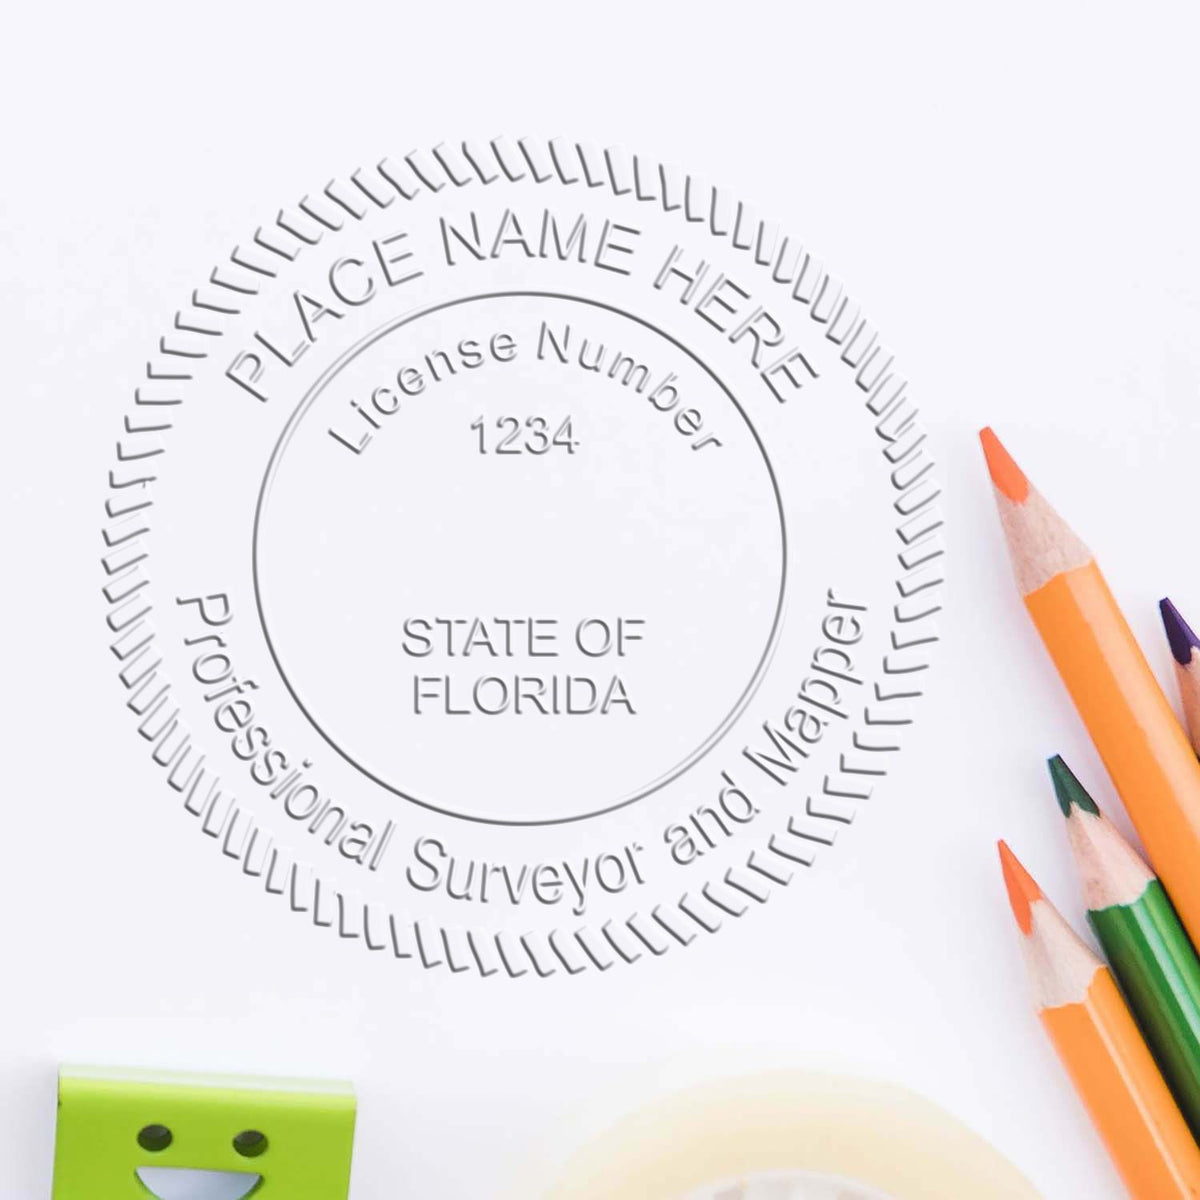 A photograph of the Hybrid Florida Land Surveyor Seal stamp impression reveals a vivid, professional image of the on paper.